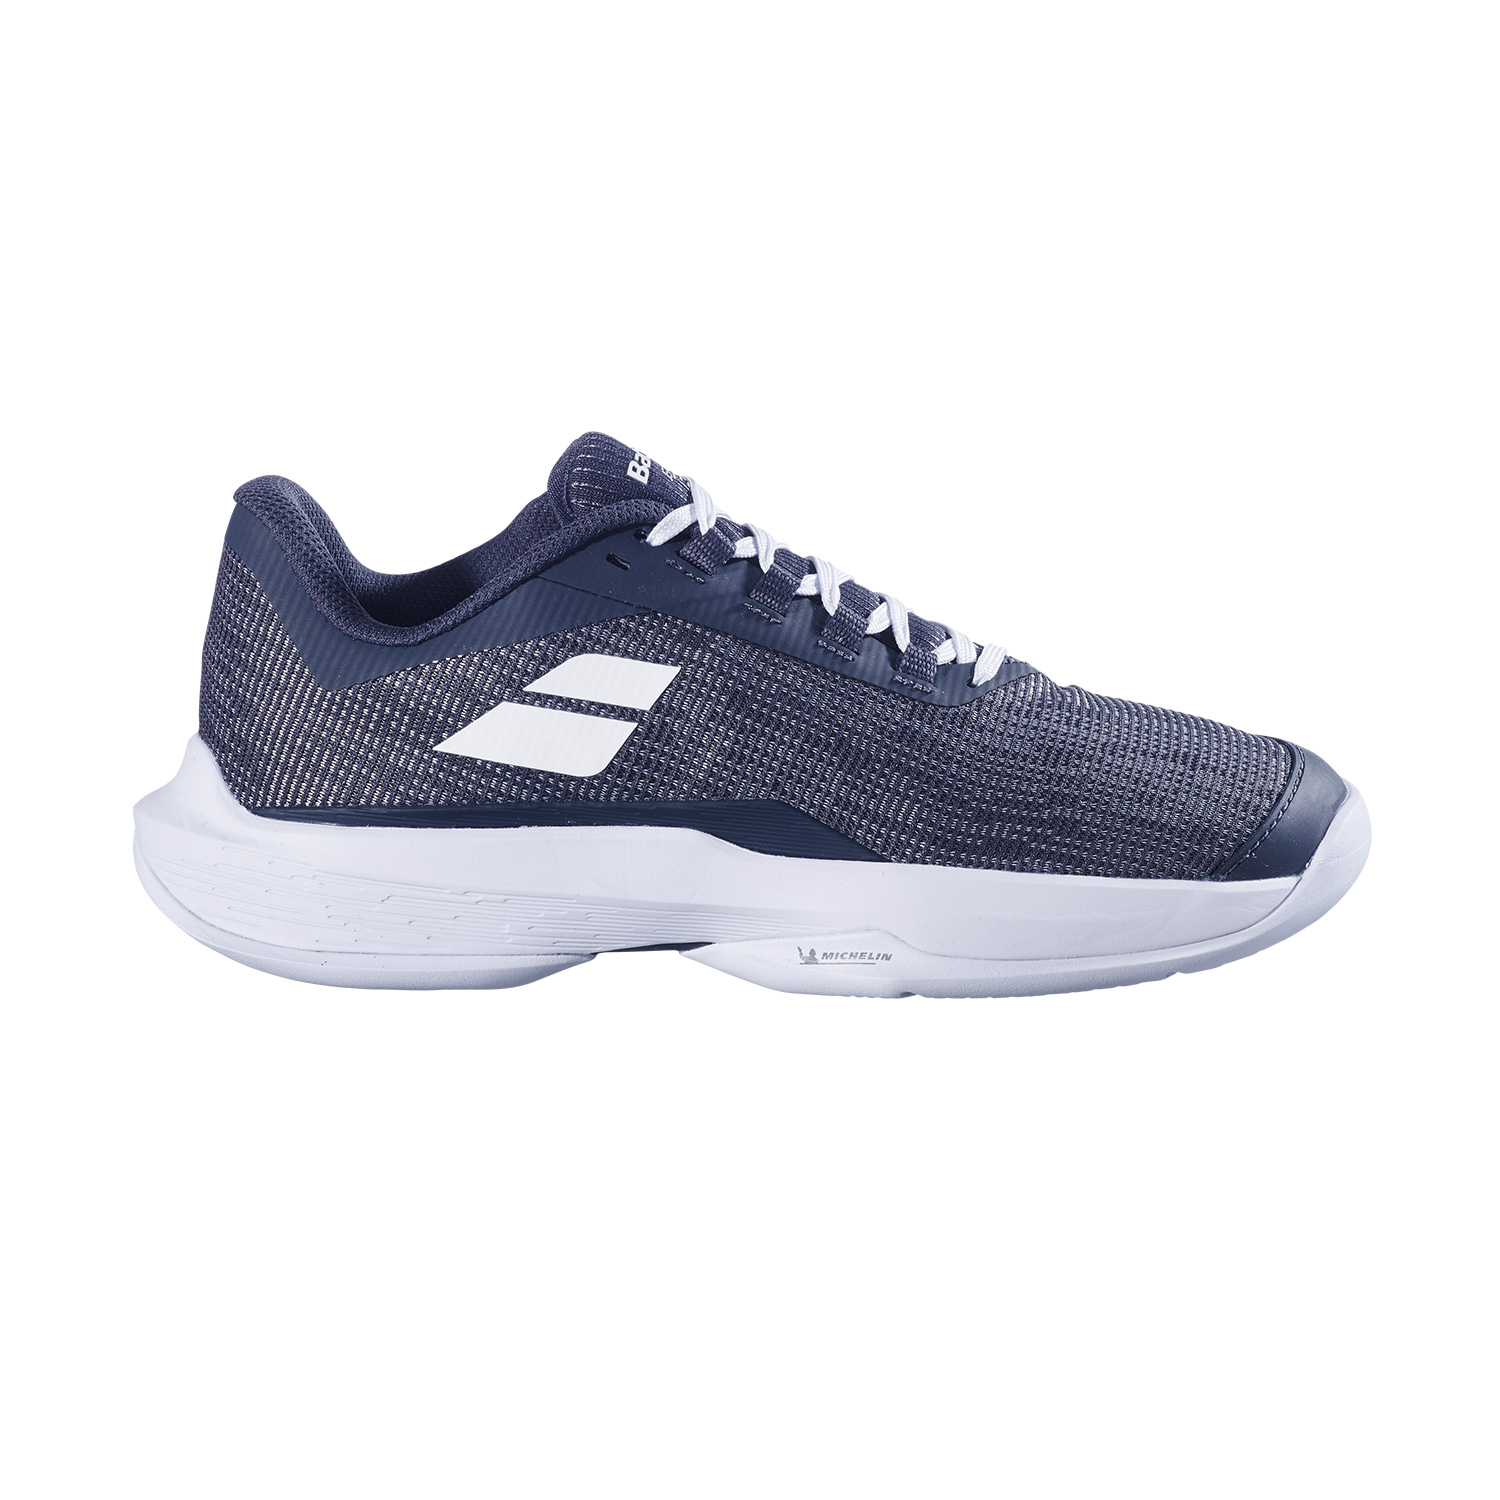 Babolat Jet Tere 2 All Court - Queen Jio Grey